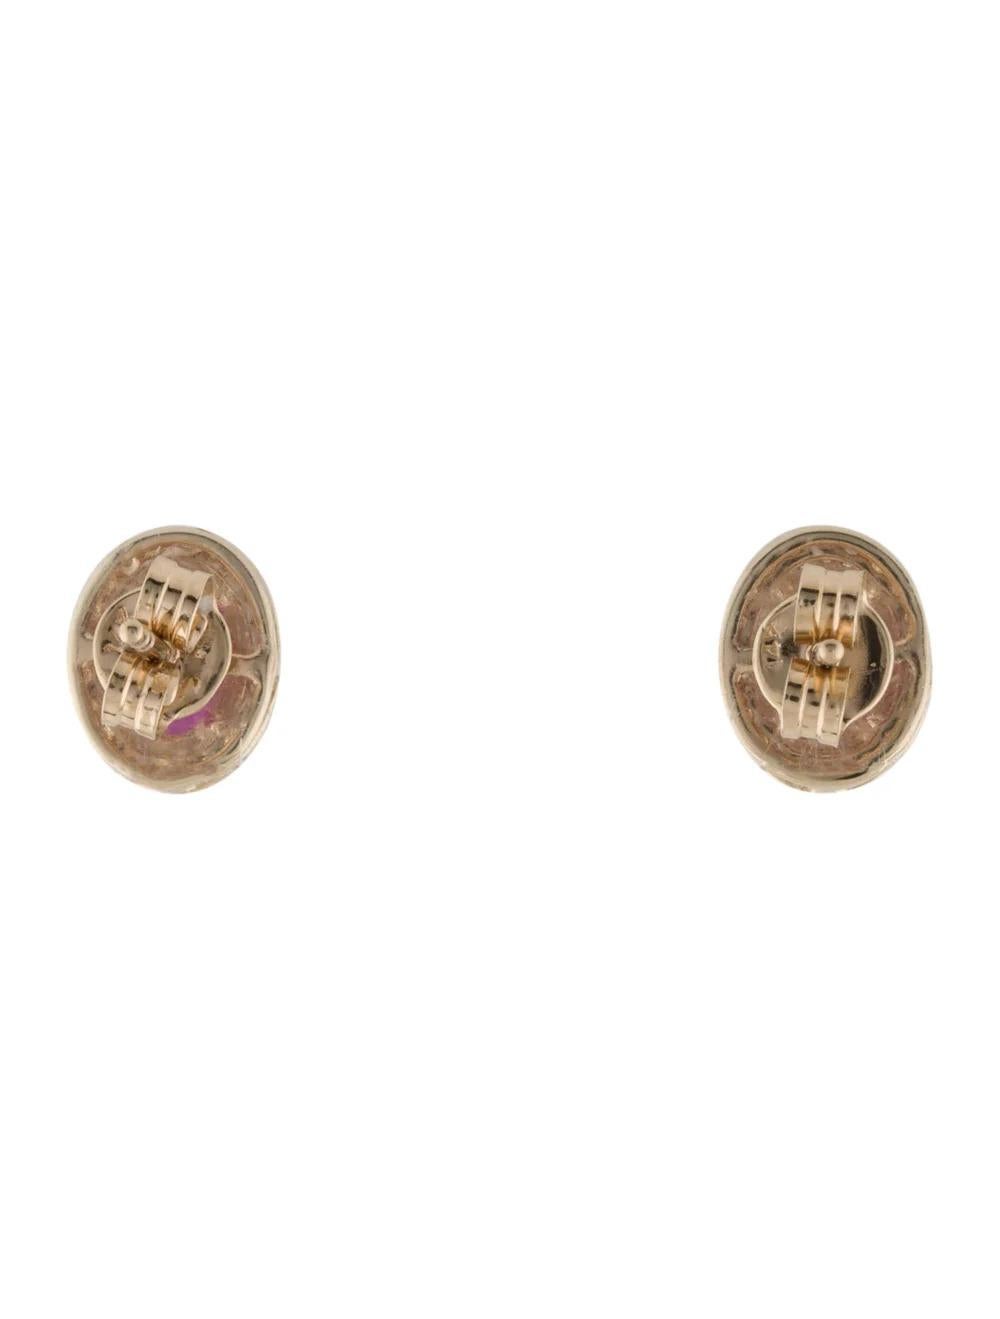 14K Ruby & Diamond Stud Earrings, 2.31ctw - Yellow Gold, Timeless Elegance In New Condition For Sale In Holtsville, NY